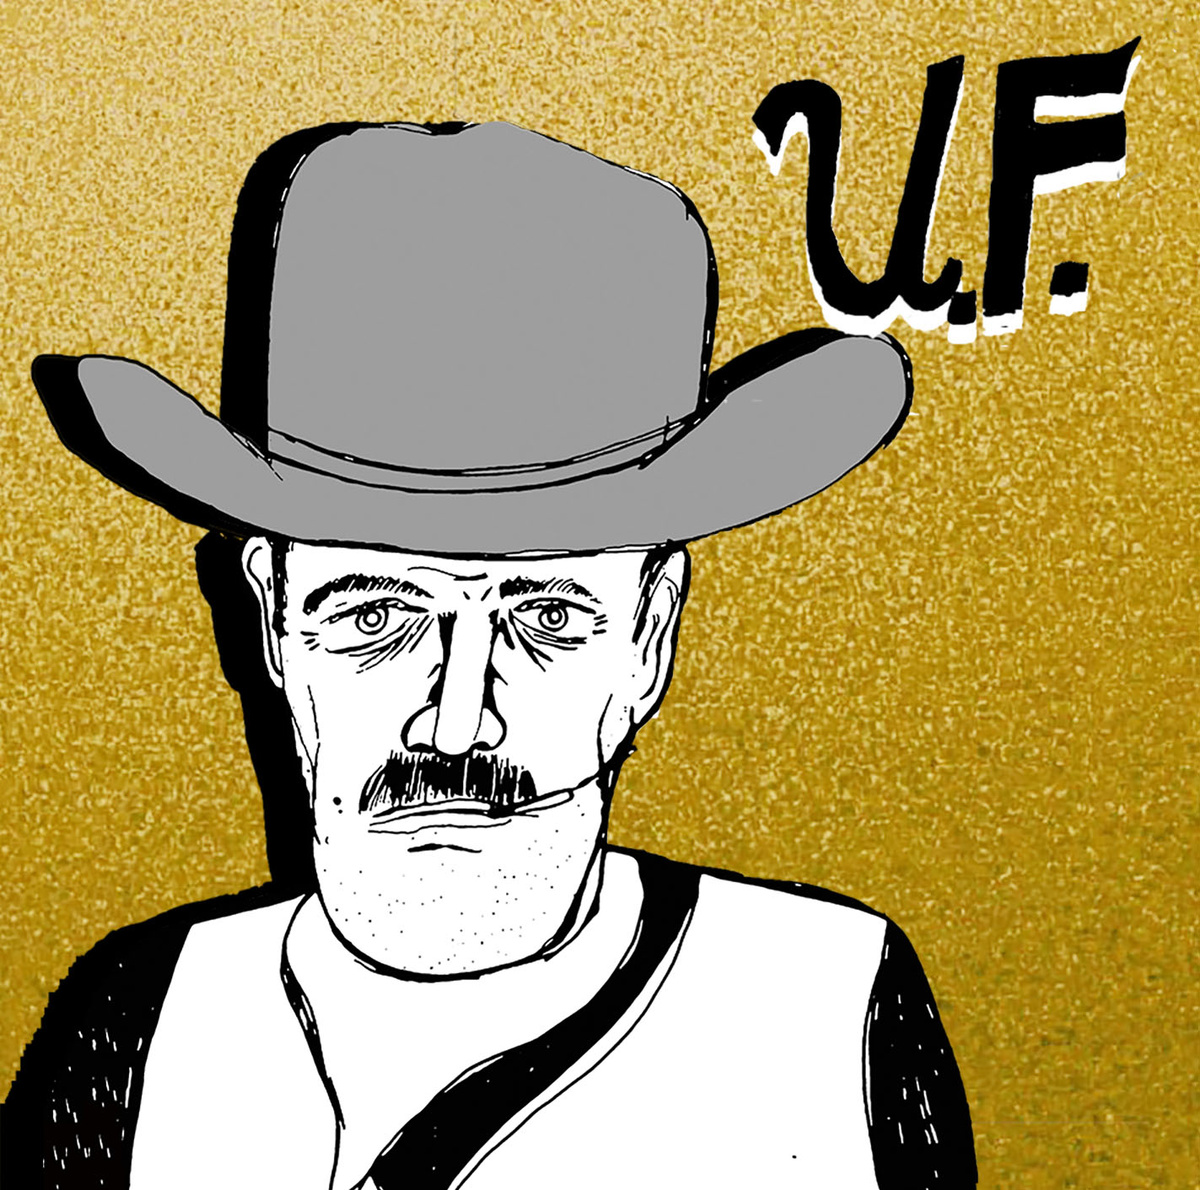 Solid Gold Cowboy album art from Unlikely Friends